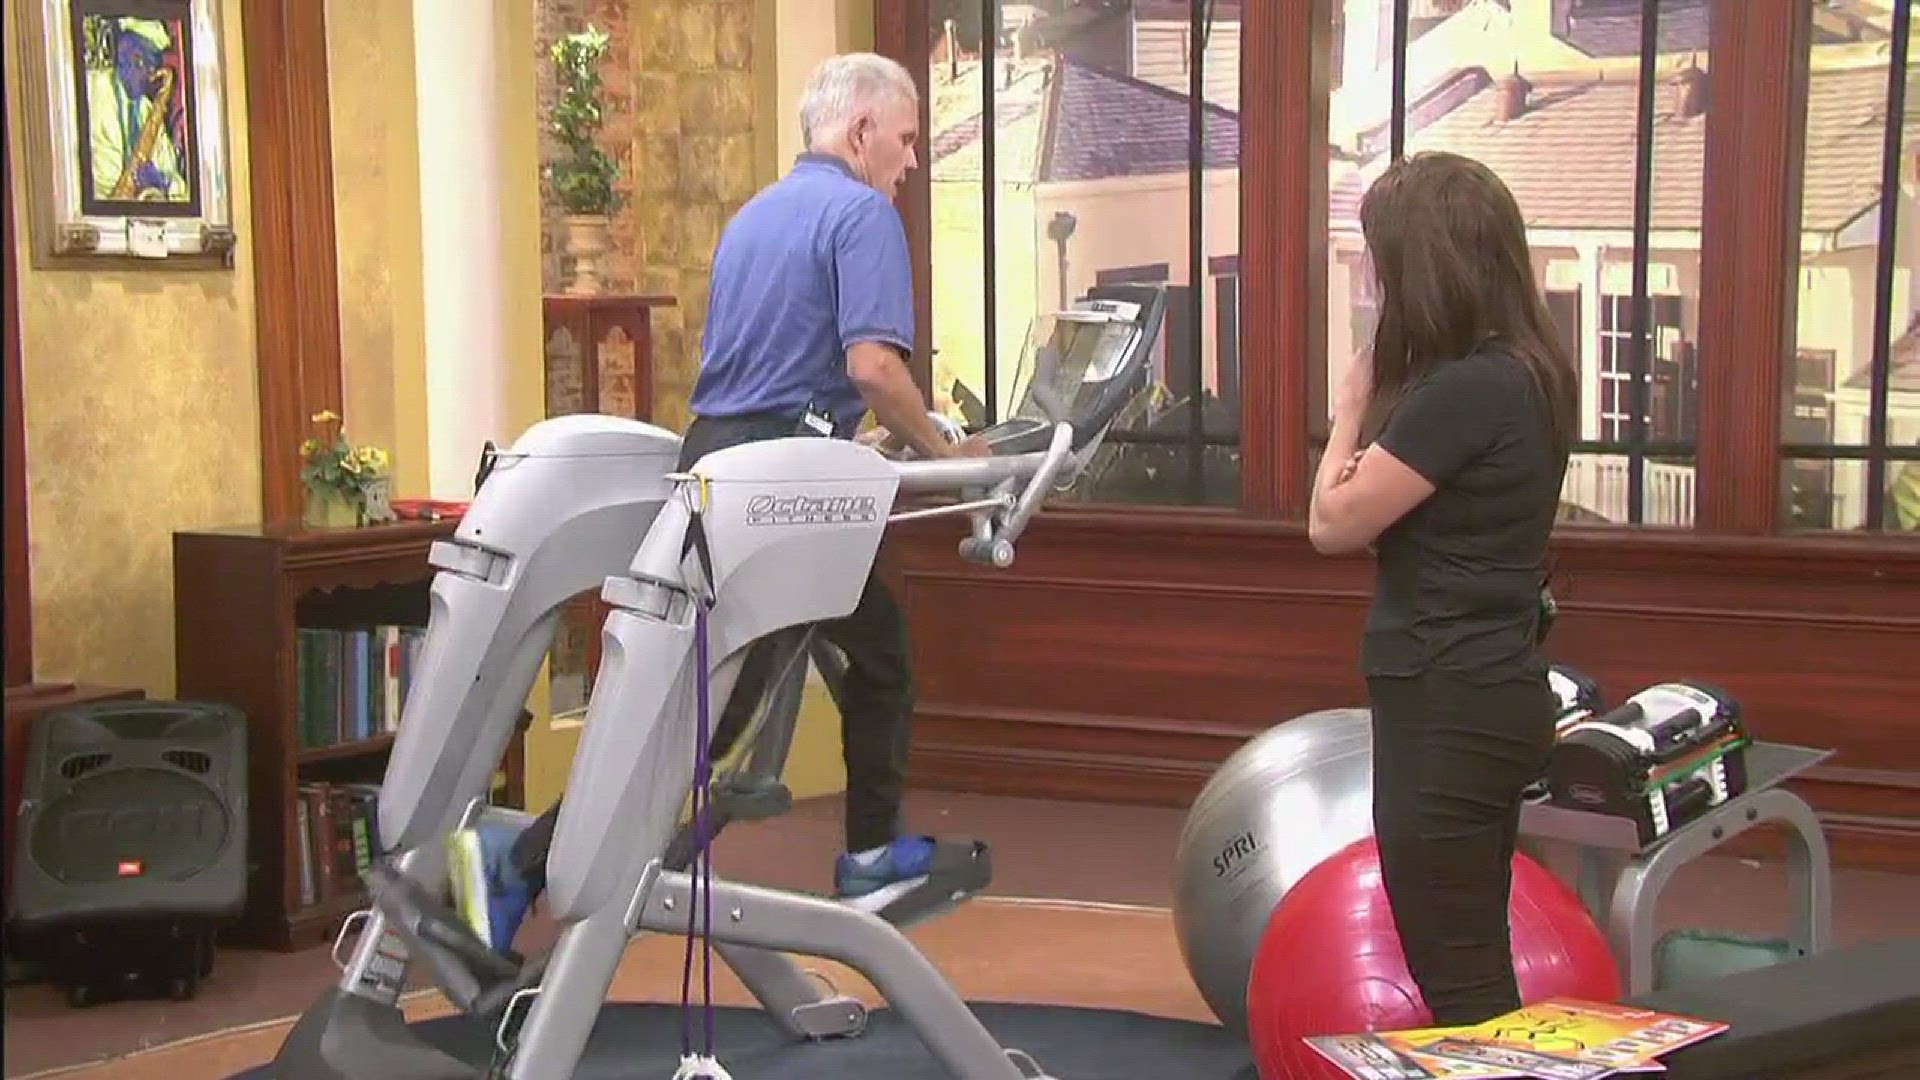 A new exercise machine makes a big impact.